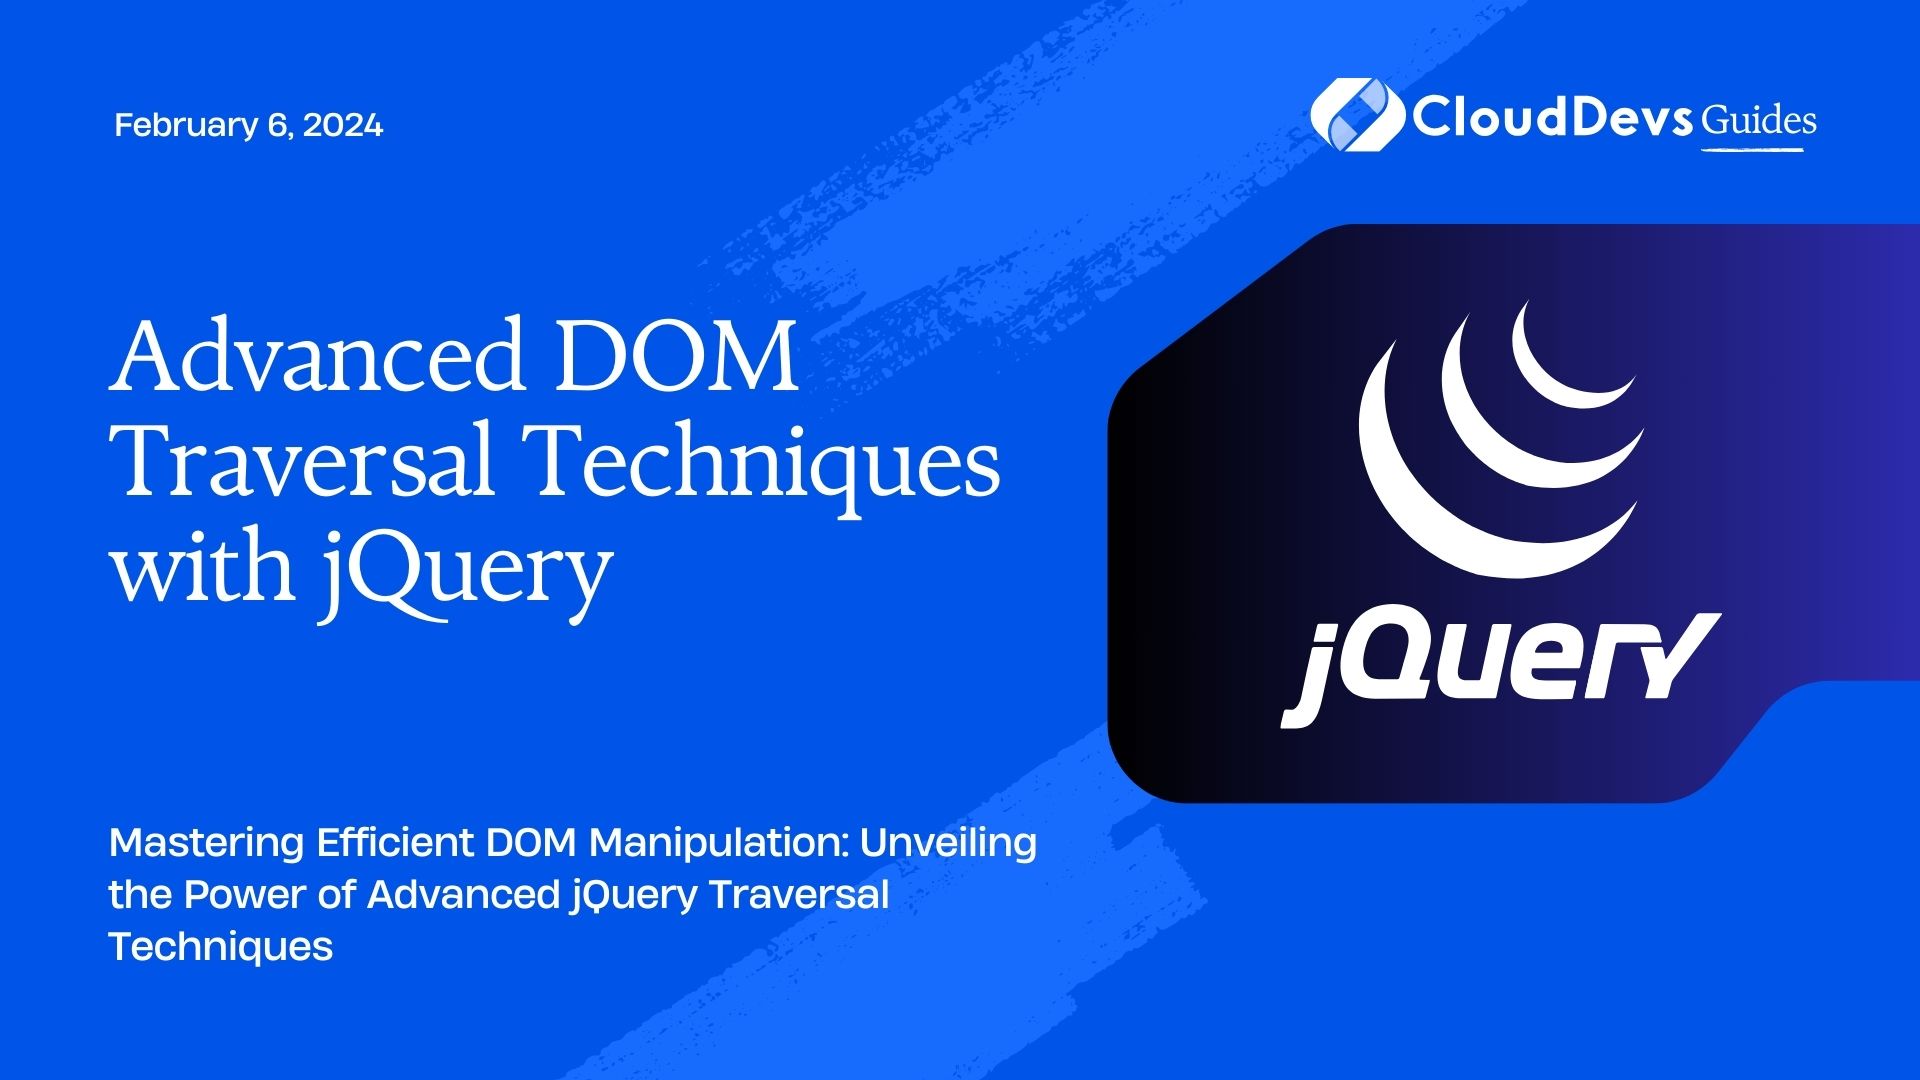 Advanced DOM Traversal Techniques with jQuery